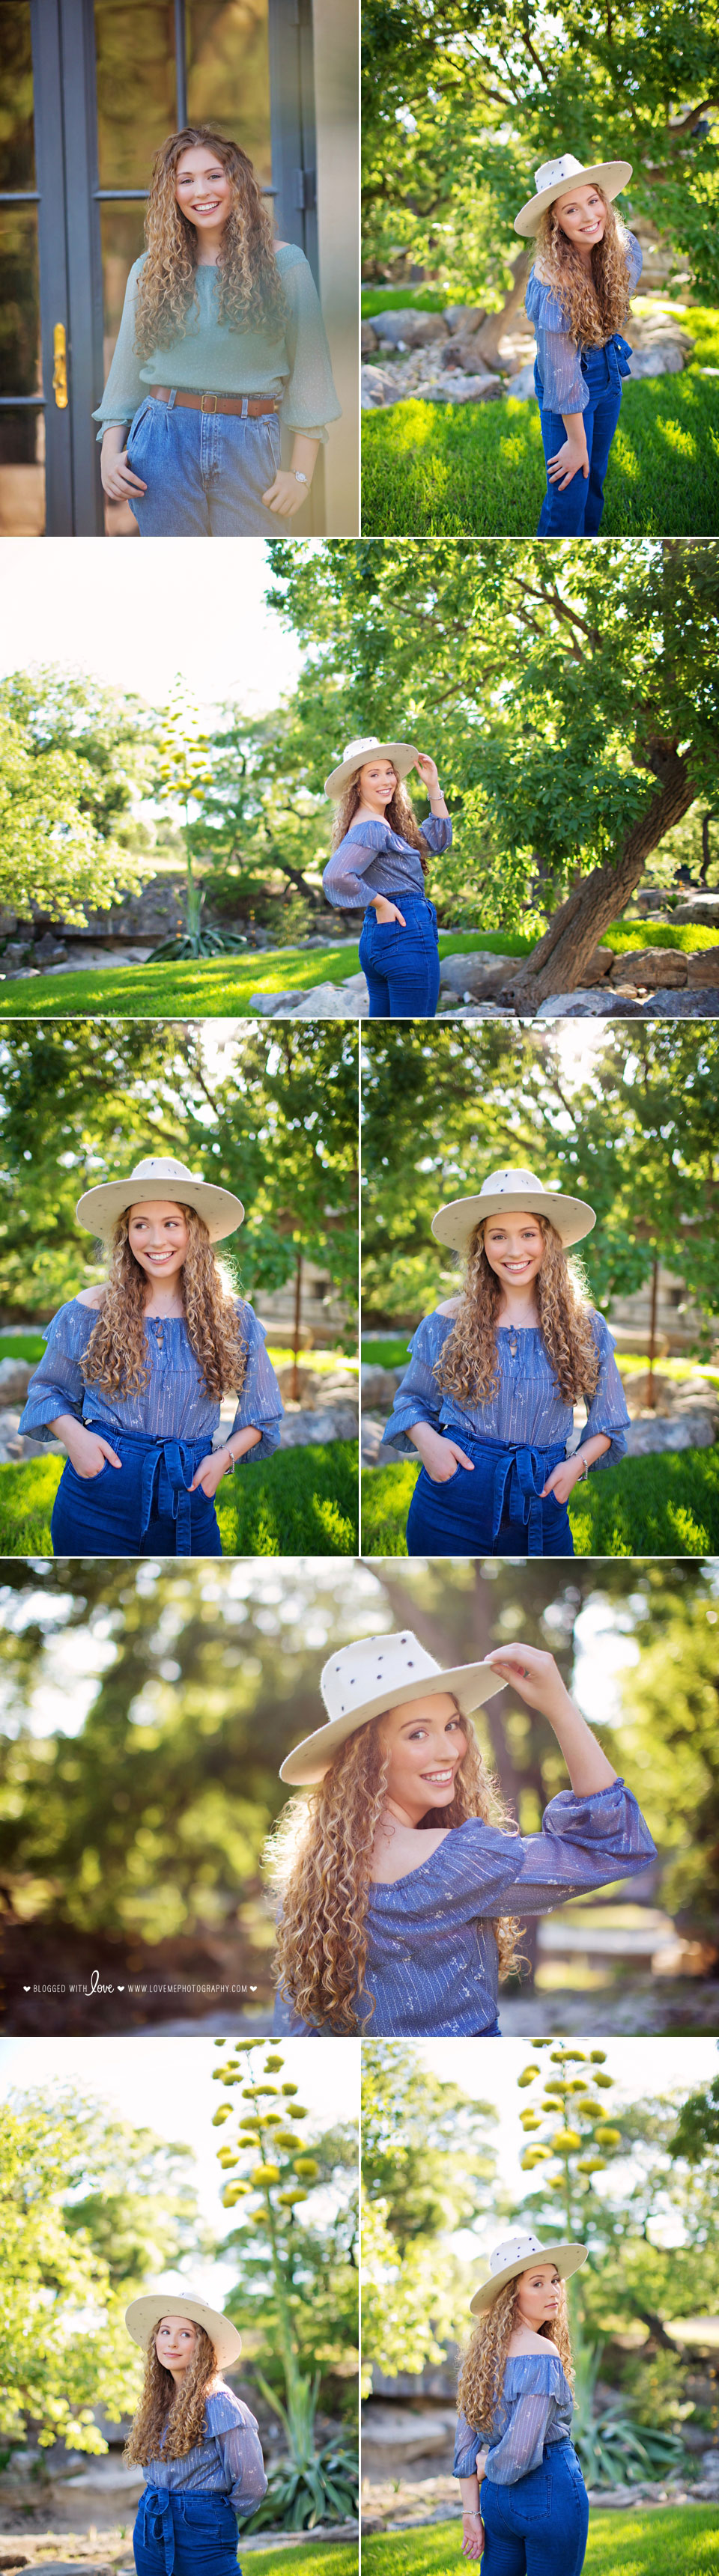 Collage of girl posing in nature